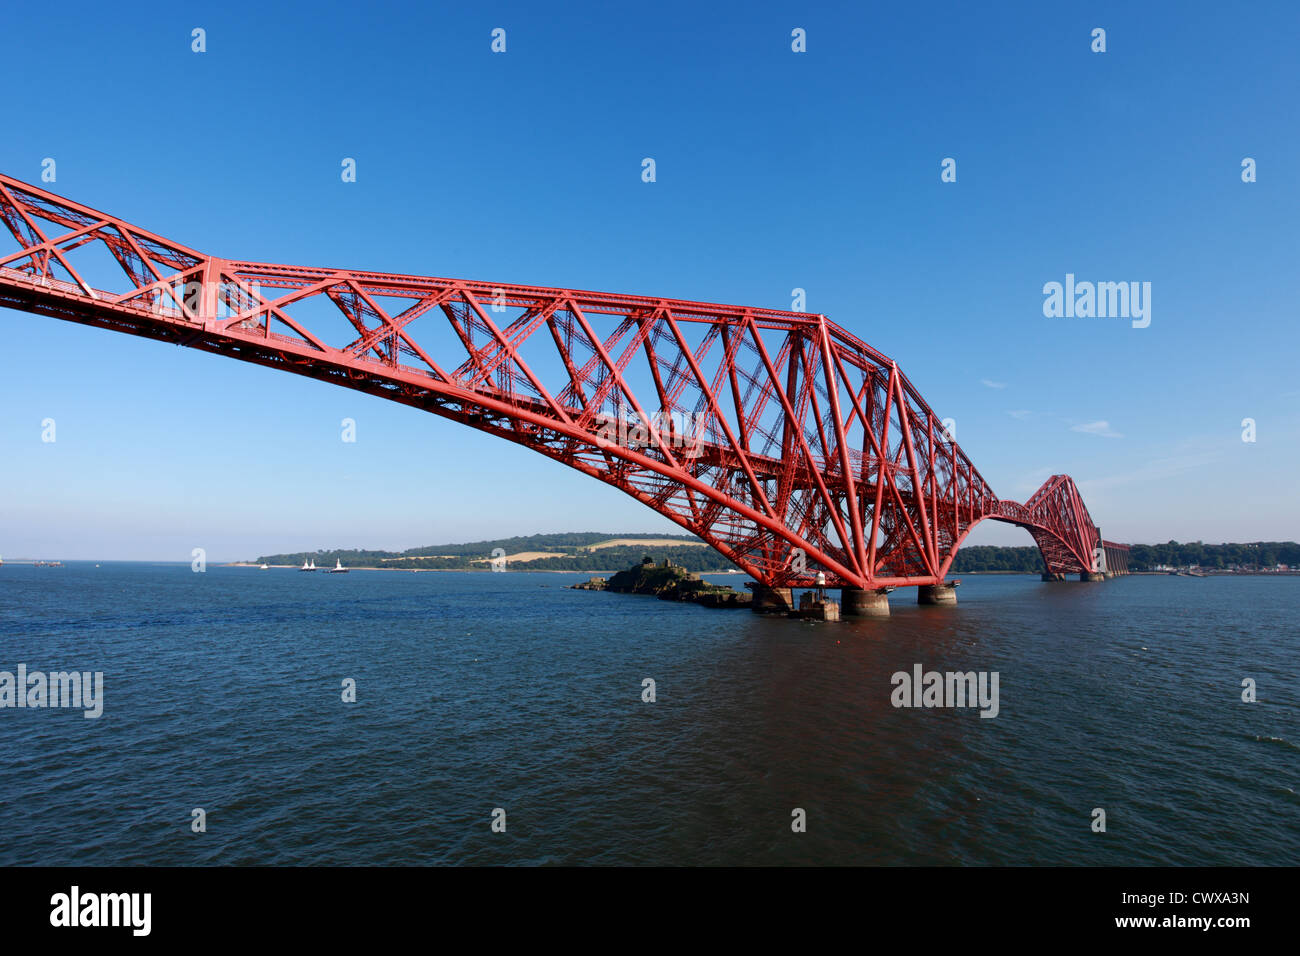 Forth Bridge in the Firth of Forth, Scotland UK Stock Photo